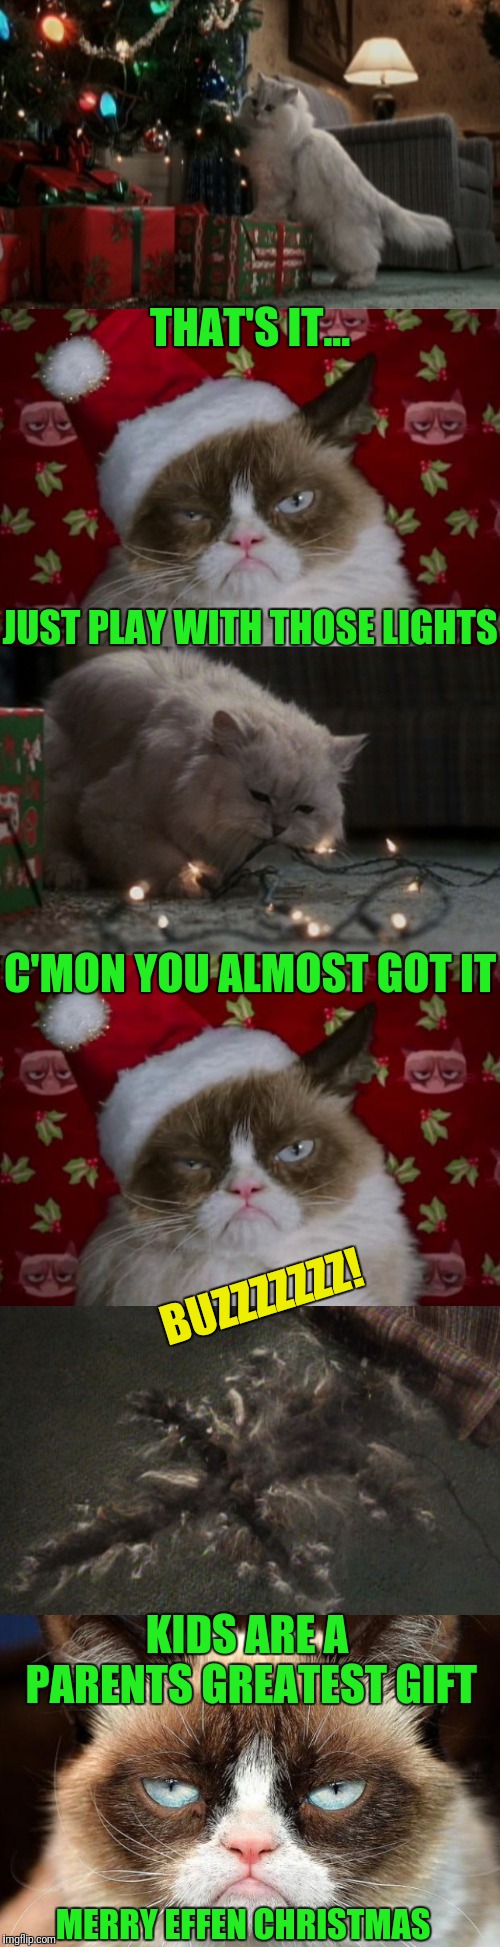 Christmas Vacation Week (From Dec 2nd to Dec 8th) A Thparky event! | THAT'S IT... JUST PLAY WITH THOSE LIGHTS; C'MON YOU ALMOST GOT IT; BUZZZZZZZ! KIDS ARE A PARENTS GREATEST GIFT; MERRY EFFEN CHRISTMAS | image tagged in memes,grumpy cat not amused,christmas vacation | made w/ Imgflip meme maker